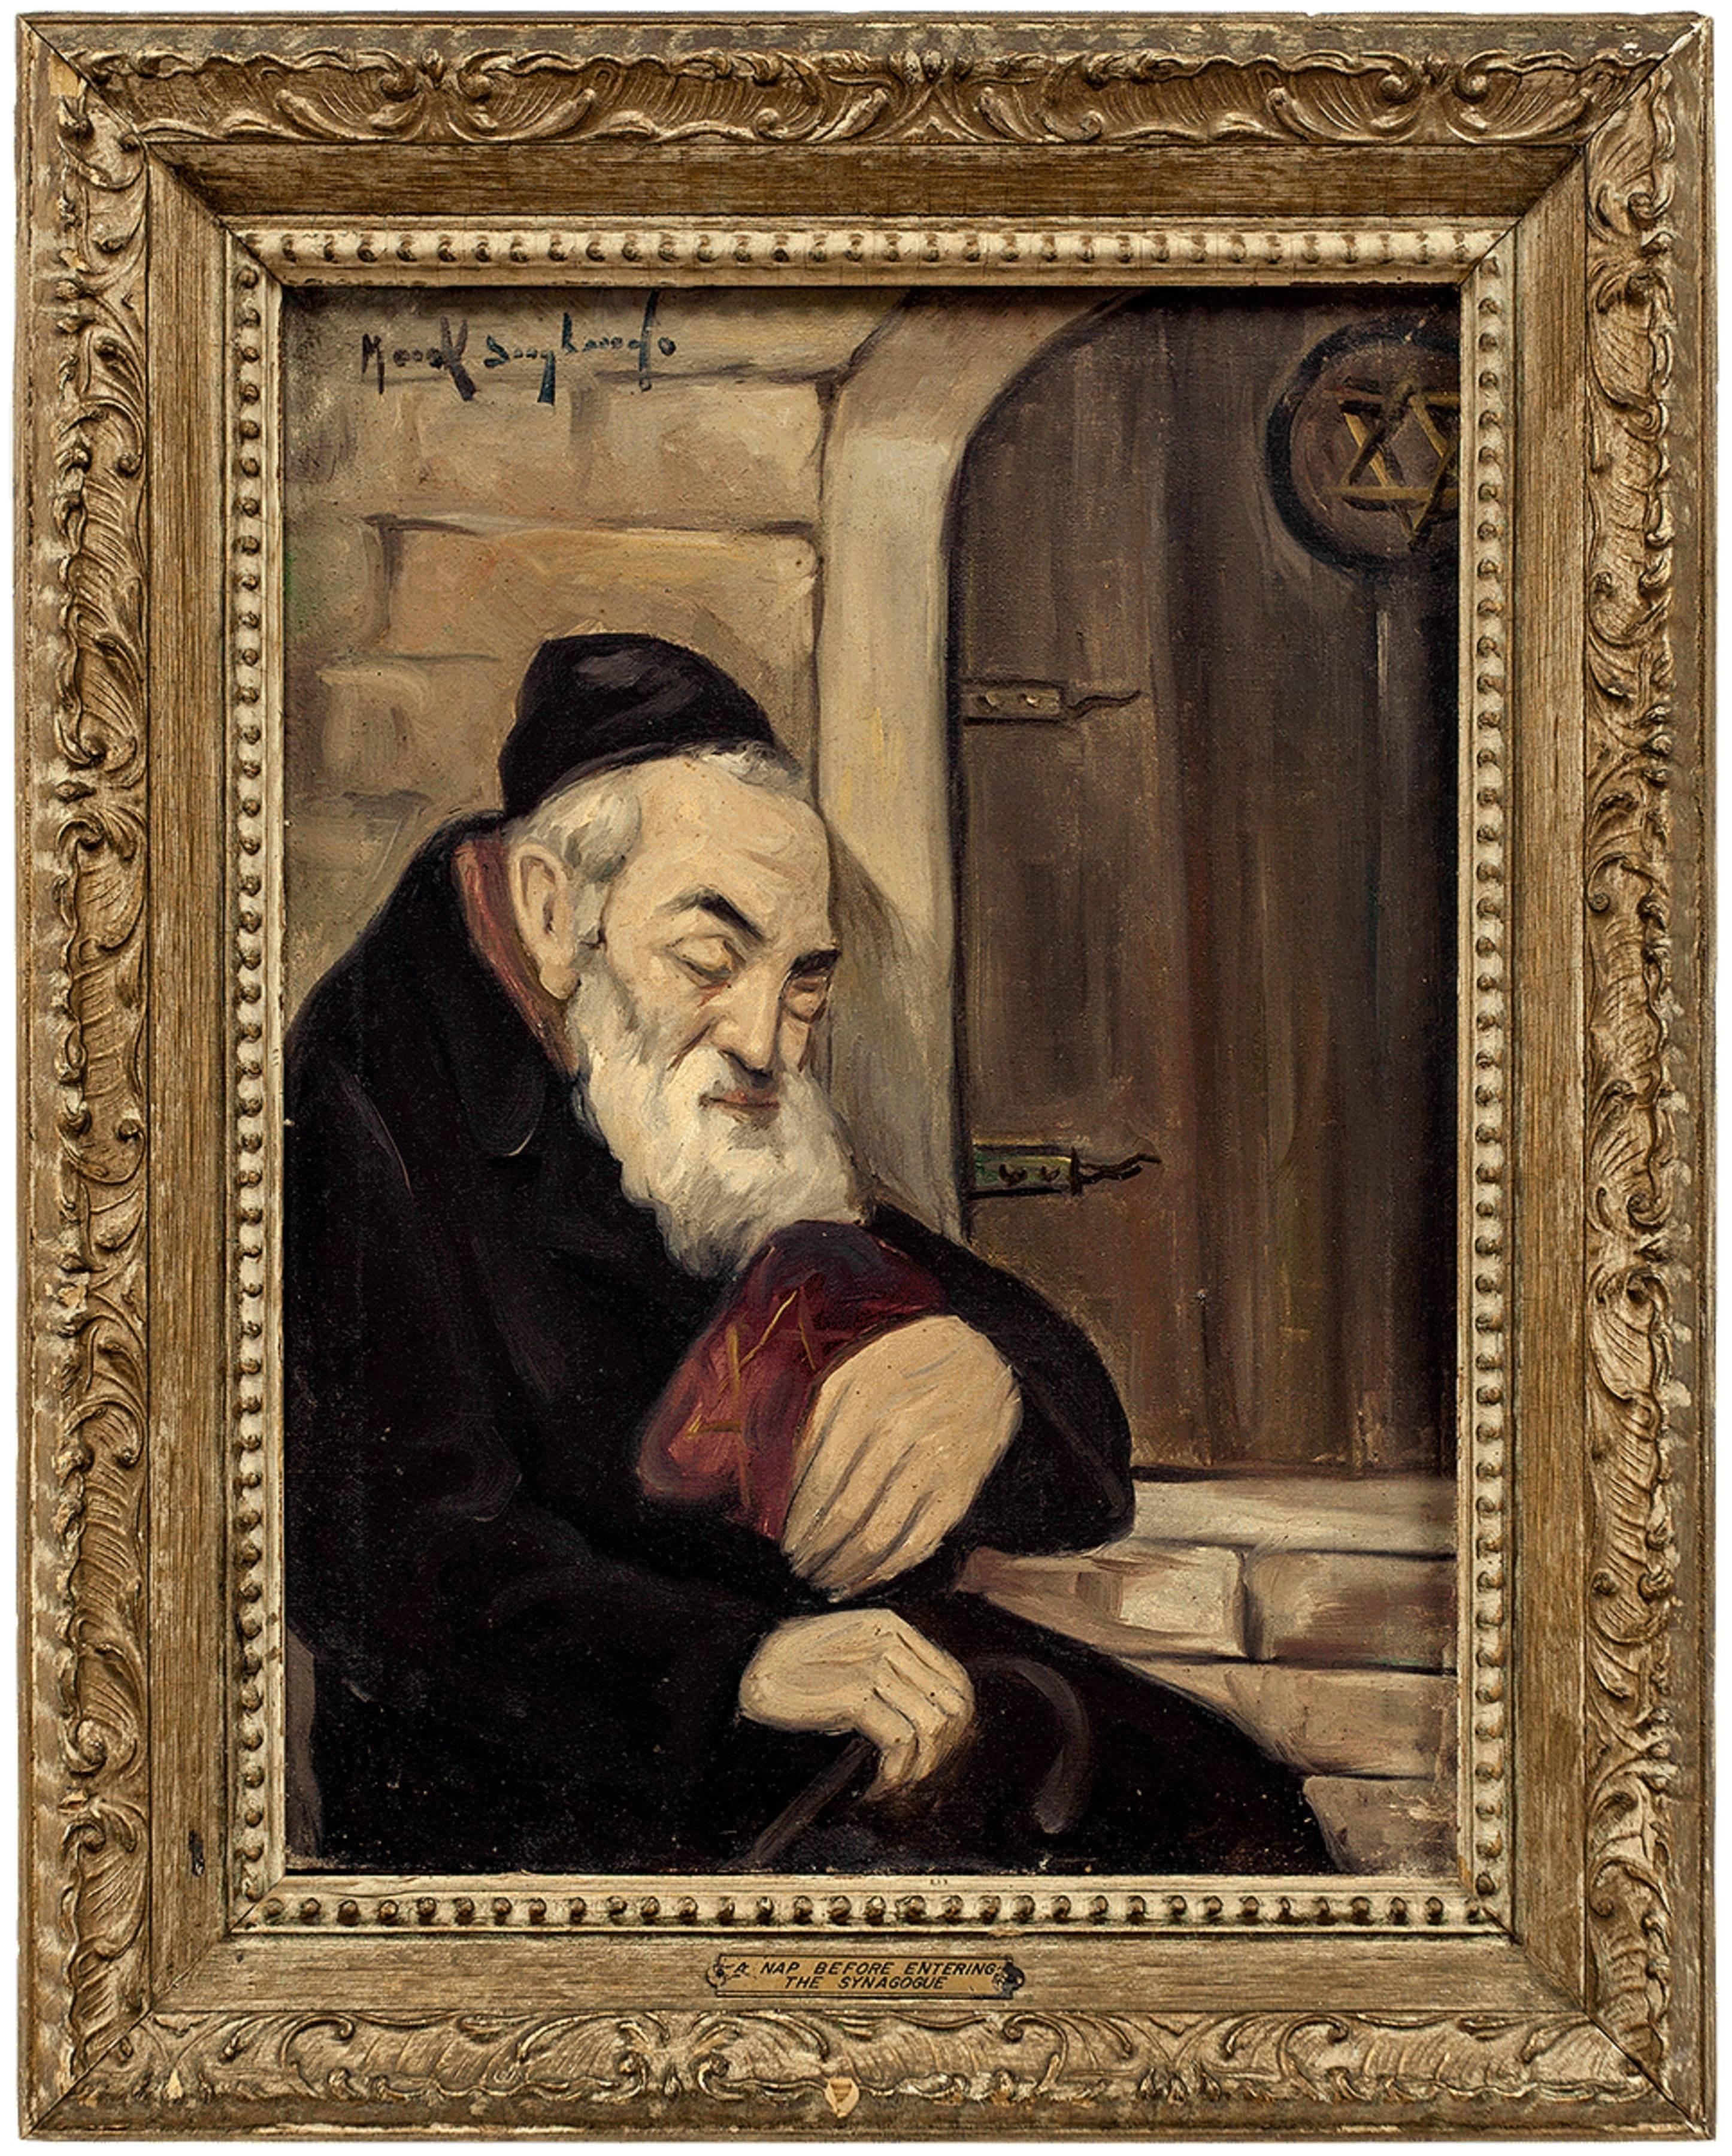 Mark Siegband Portrait Painting - A Nap Before Entering the Synagogue Judaica Oil Painting Jewish Hasidic Rabbi